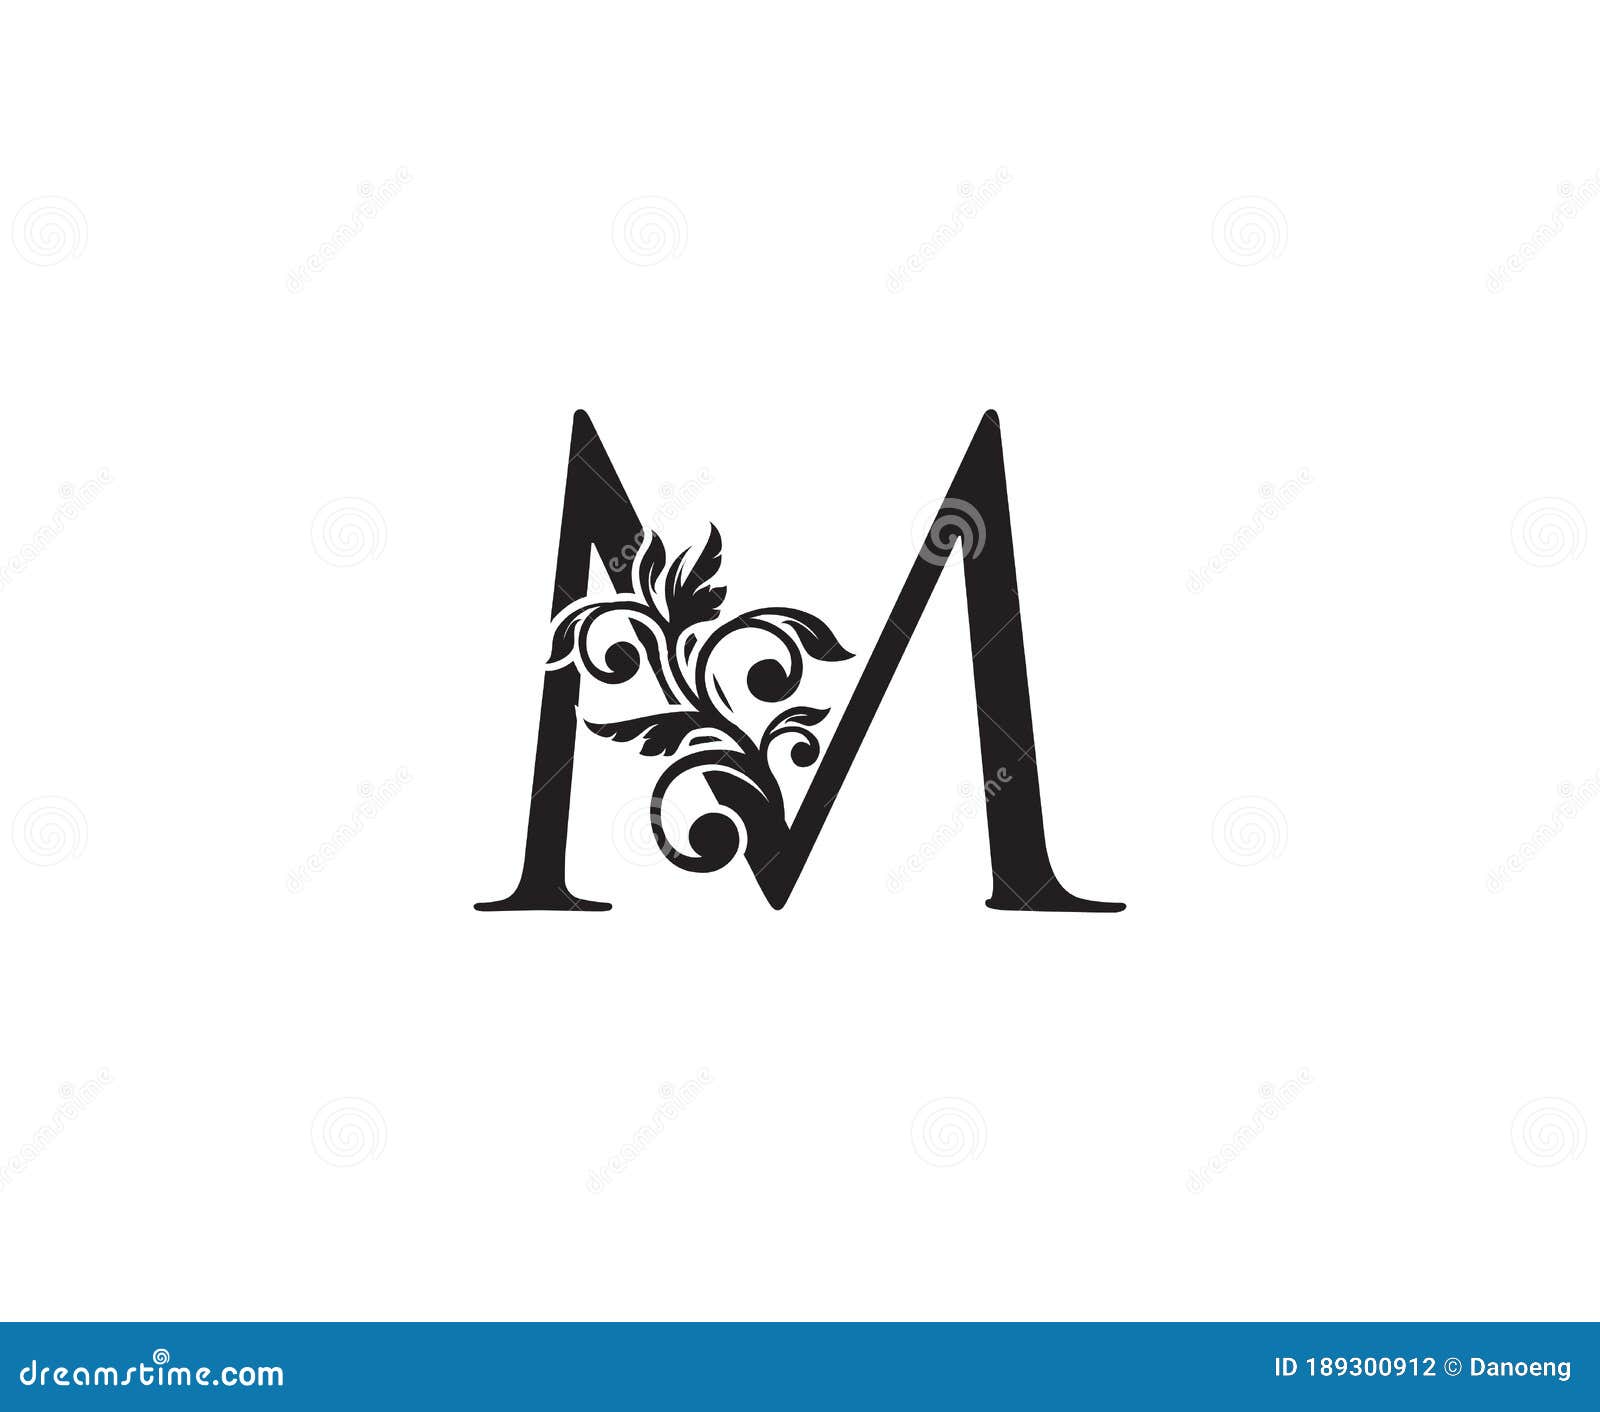 Old Paper With Decorative Letter M High-Res Vector Graphic - Getty Images